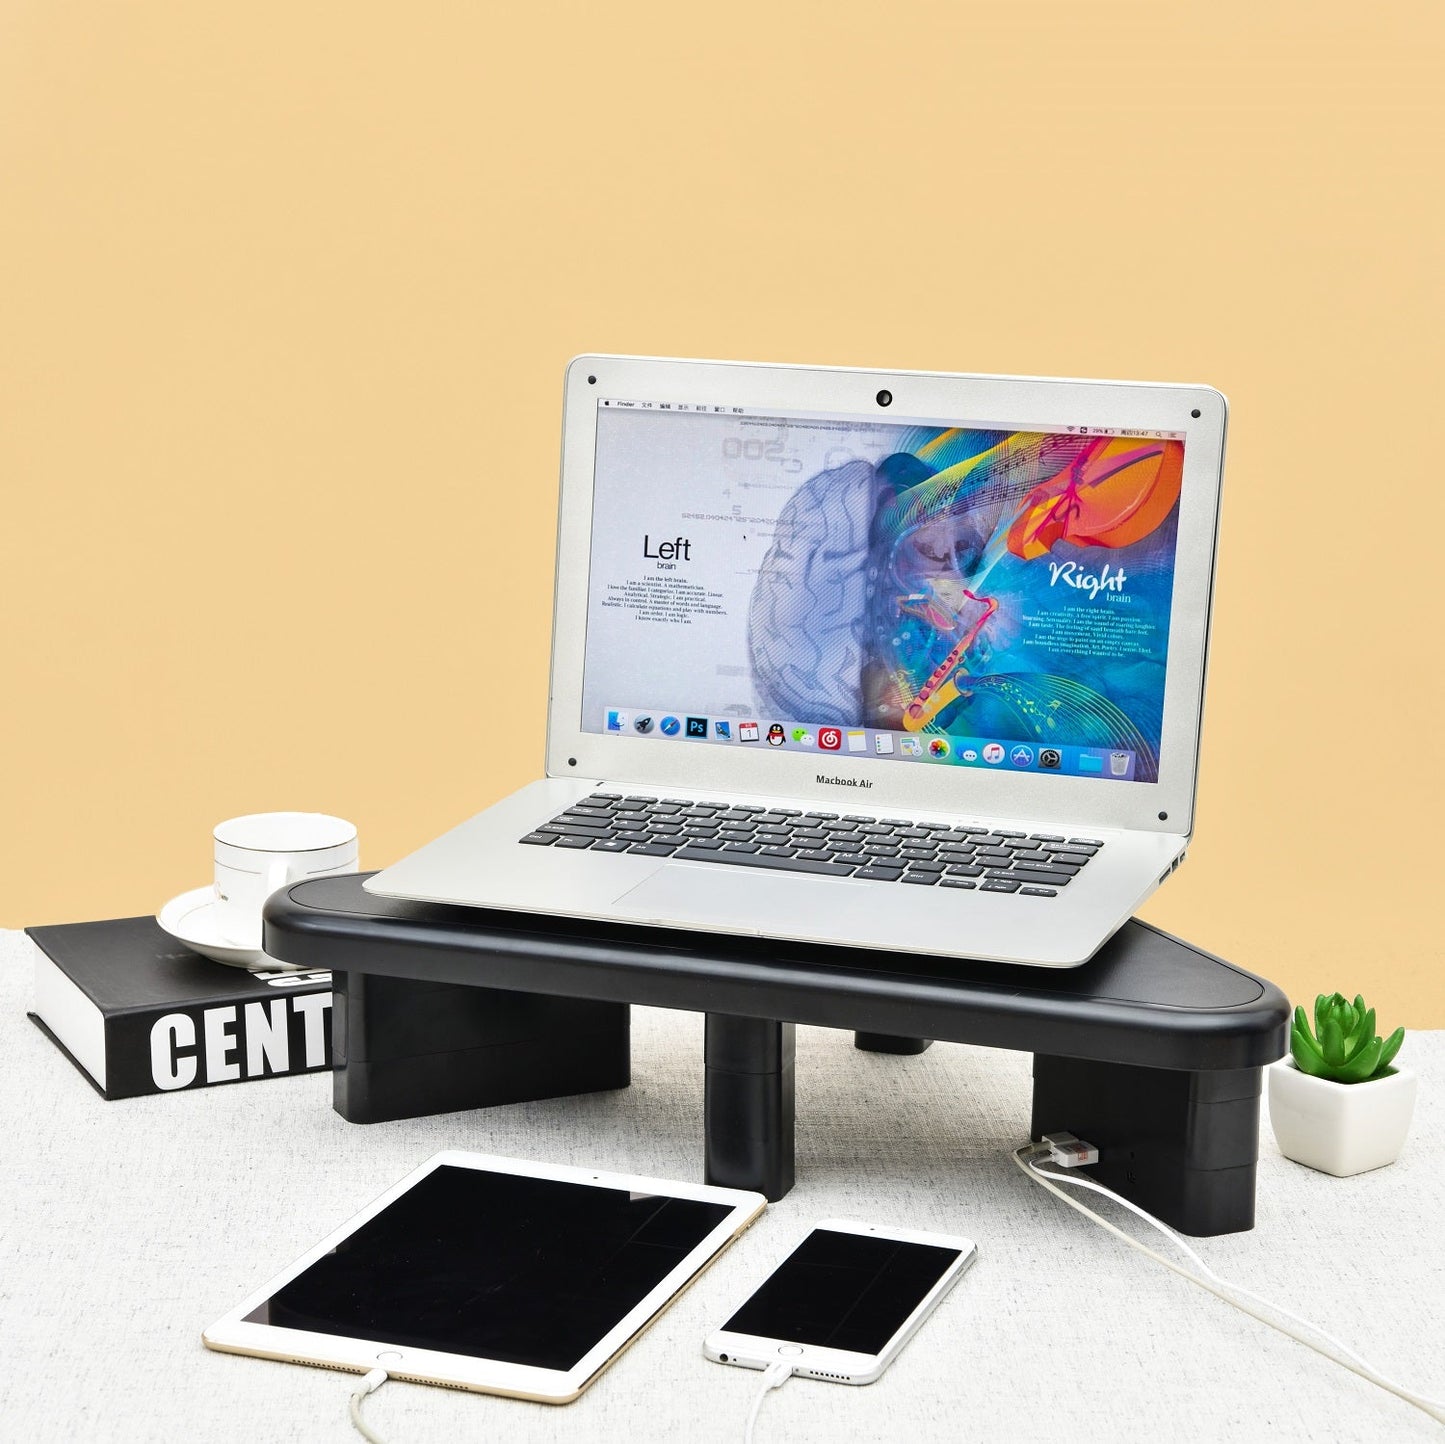 DAC® Stax MP-214 Height-Adjustable Corner Monitor/Laptop Stand with 2-USB Ports, Black